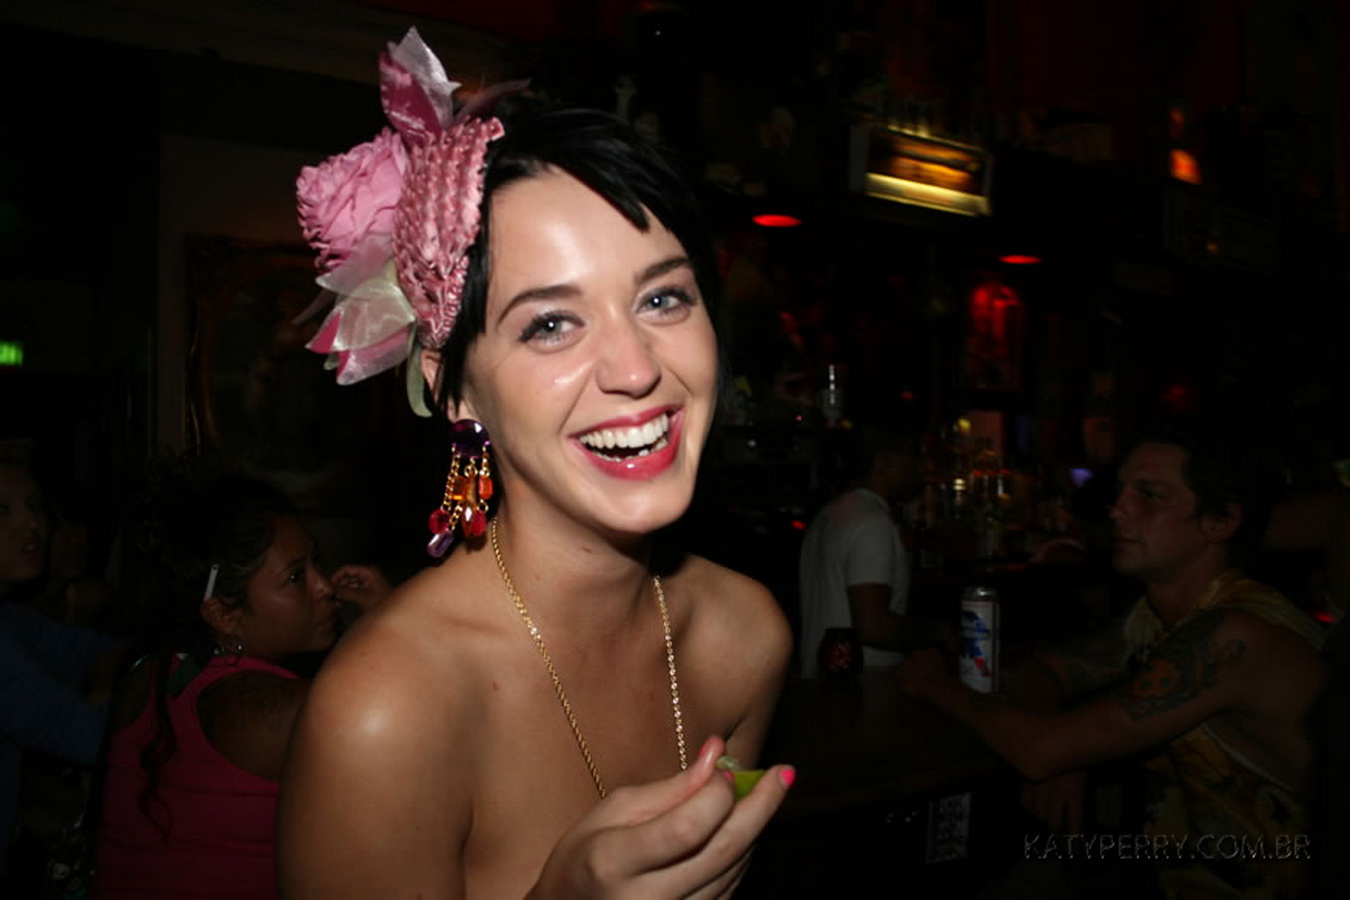 Katy_Perry_bobsslip_drunk_cleavage_downblouse_upskirt_nipslip_at_her_birthday_2007_party_99x_HQ_106.jpg